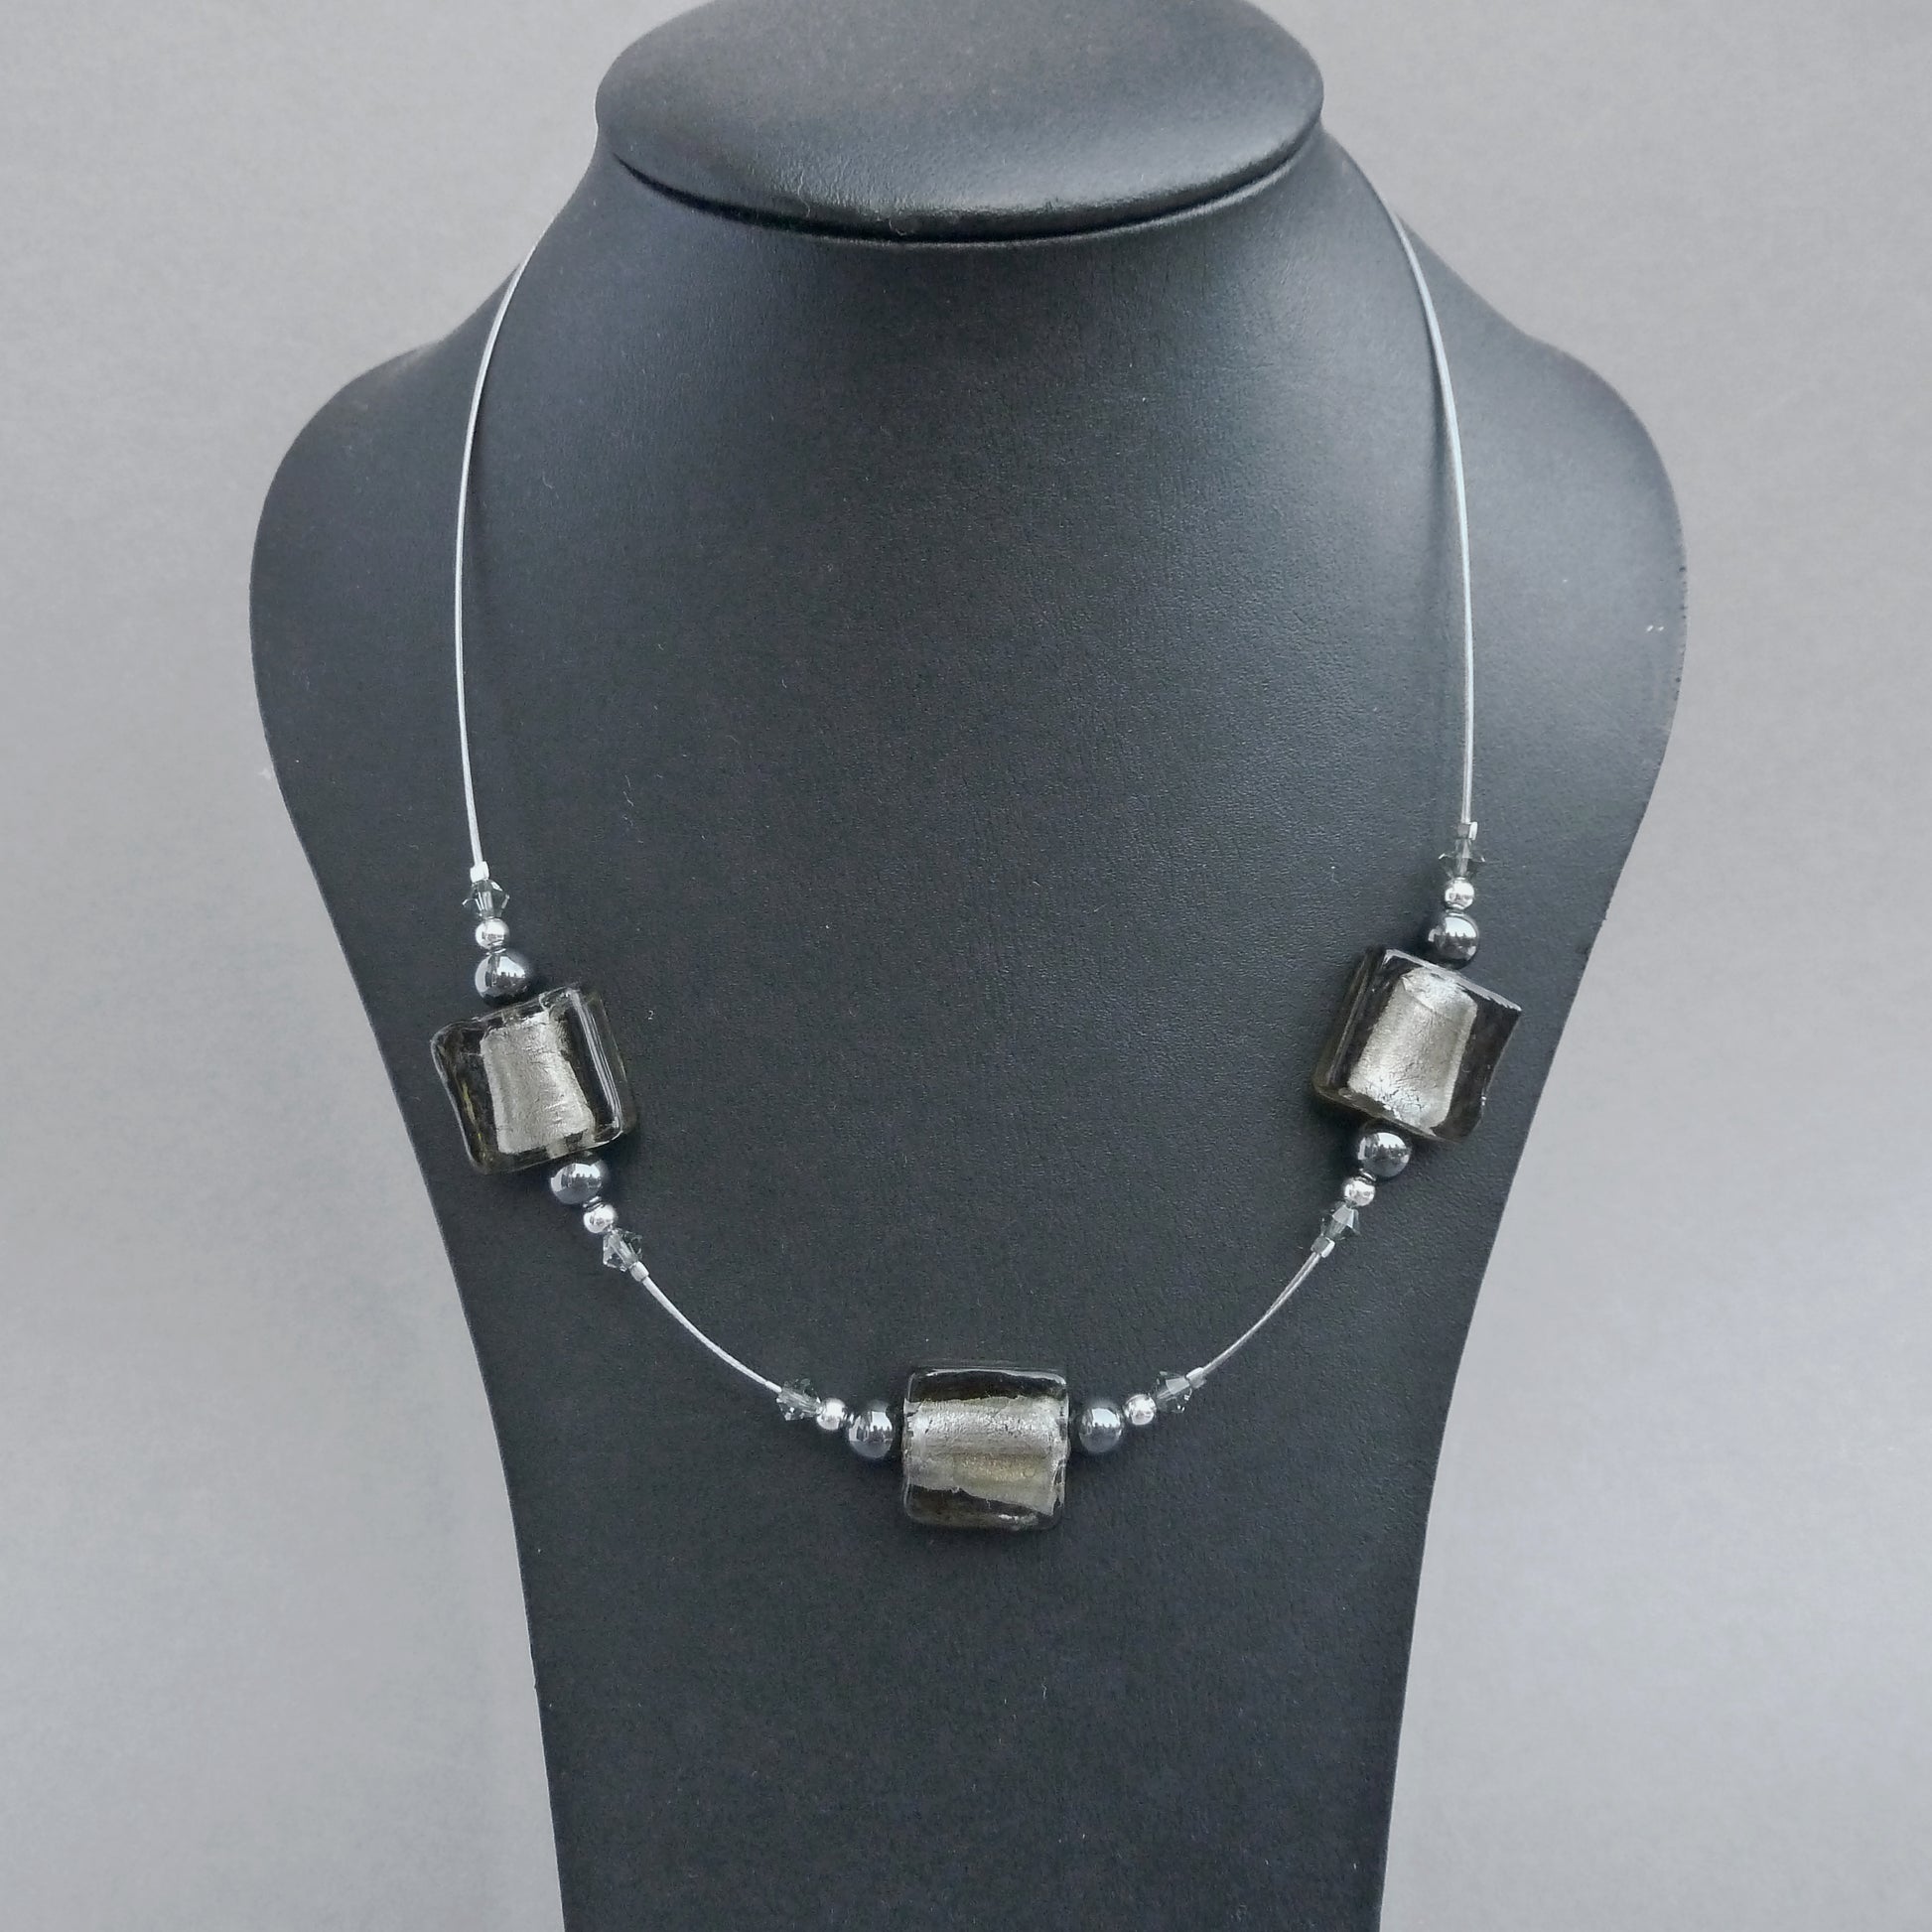 Grey fused glass necklace